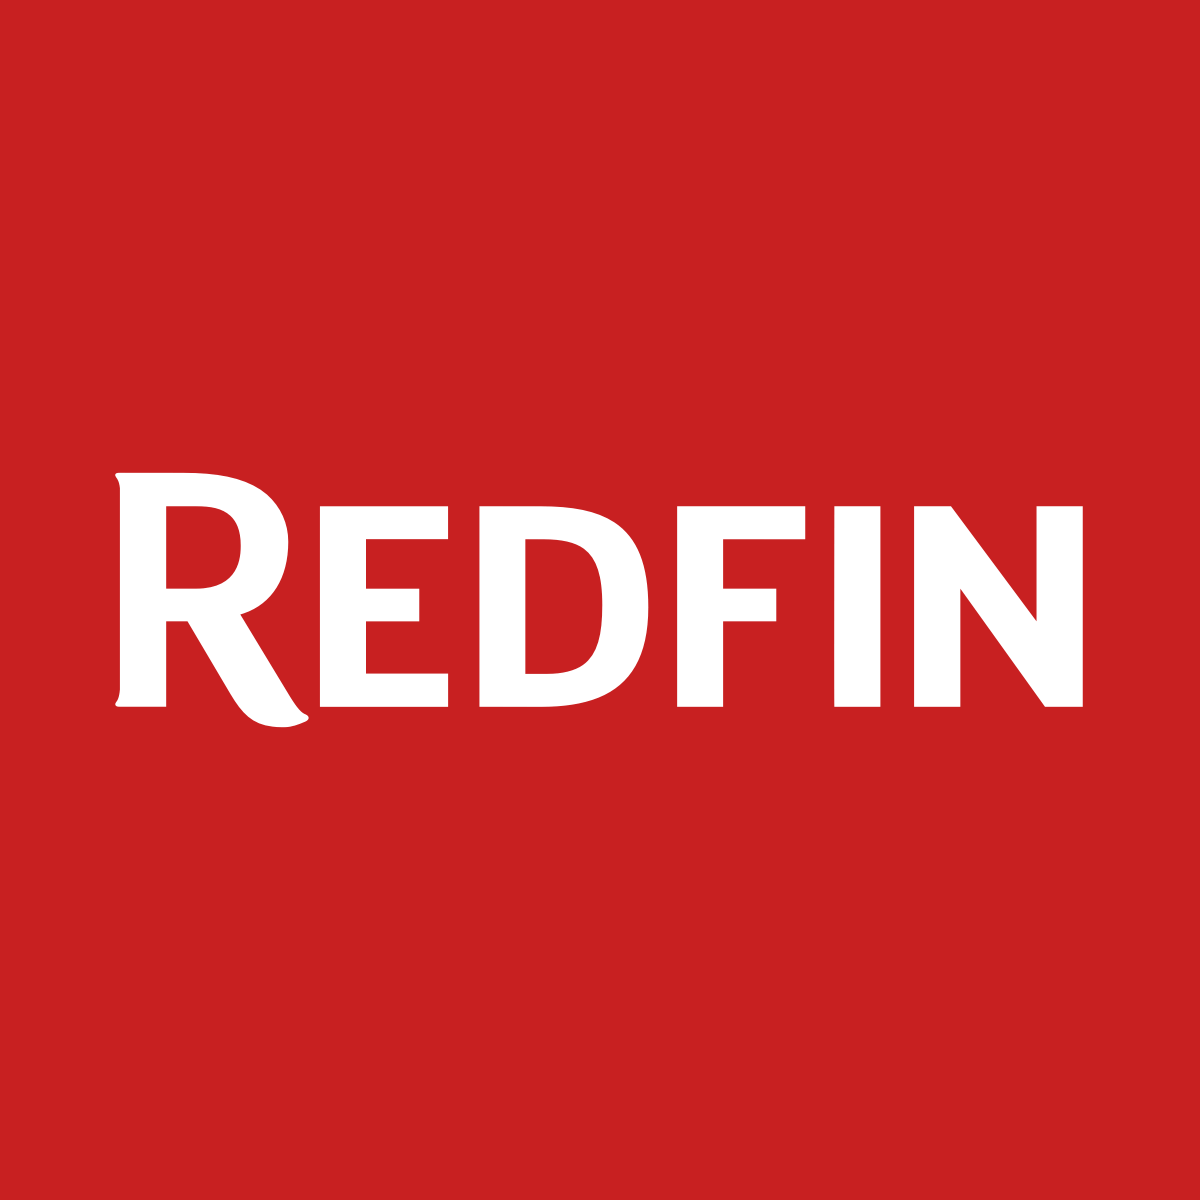 Red Real Estate Logo - Real Estate, Homes for Sale, MLS Listings, Agents | Redfin